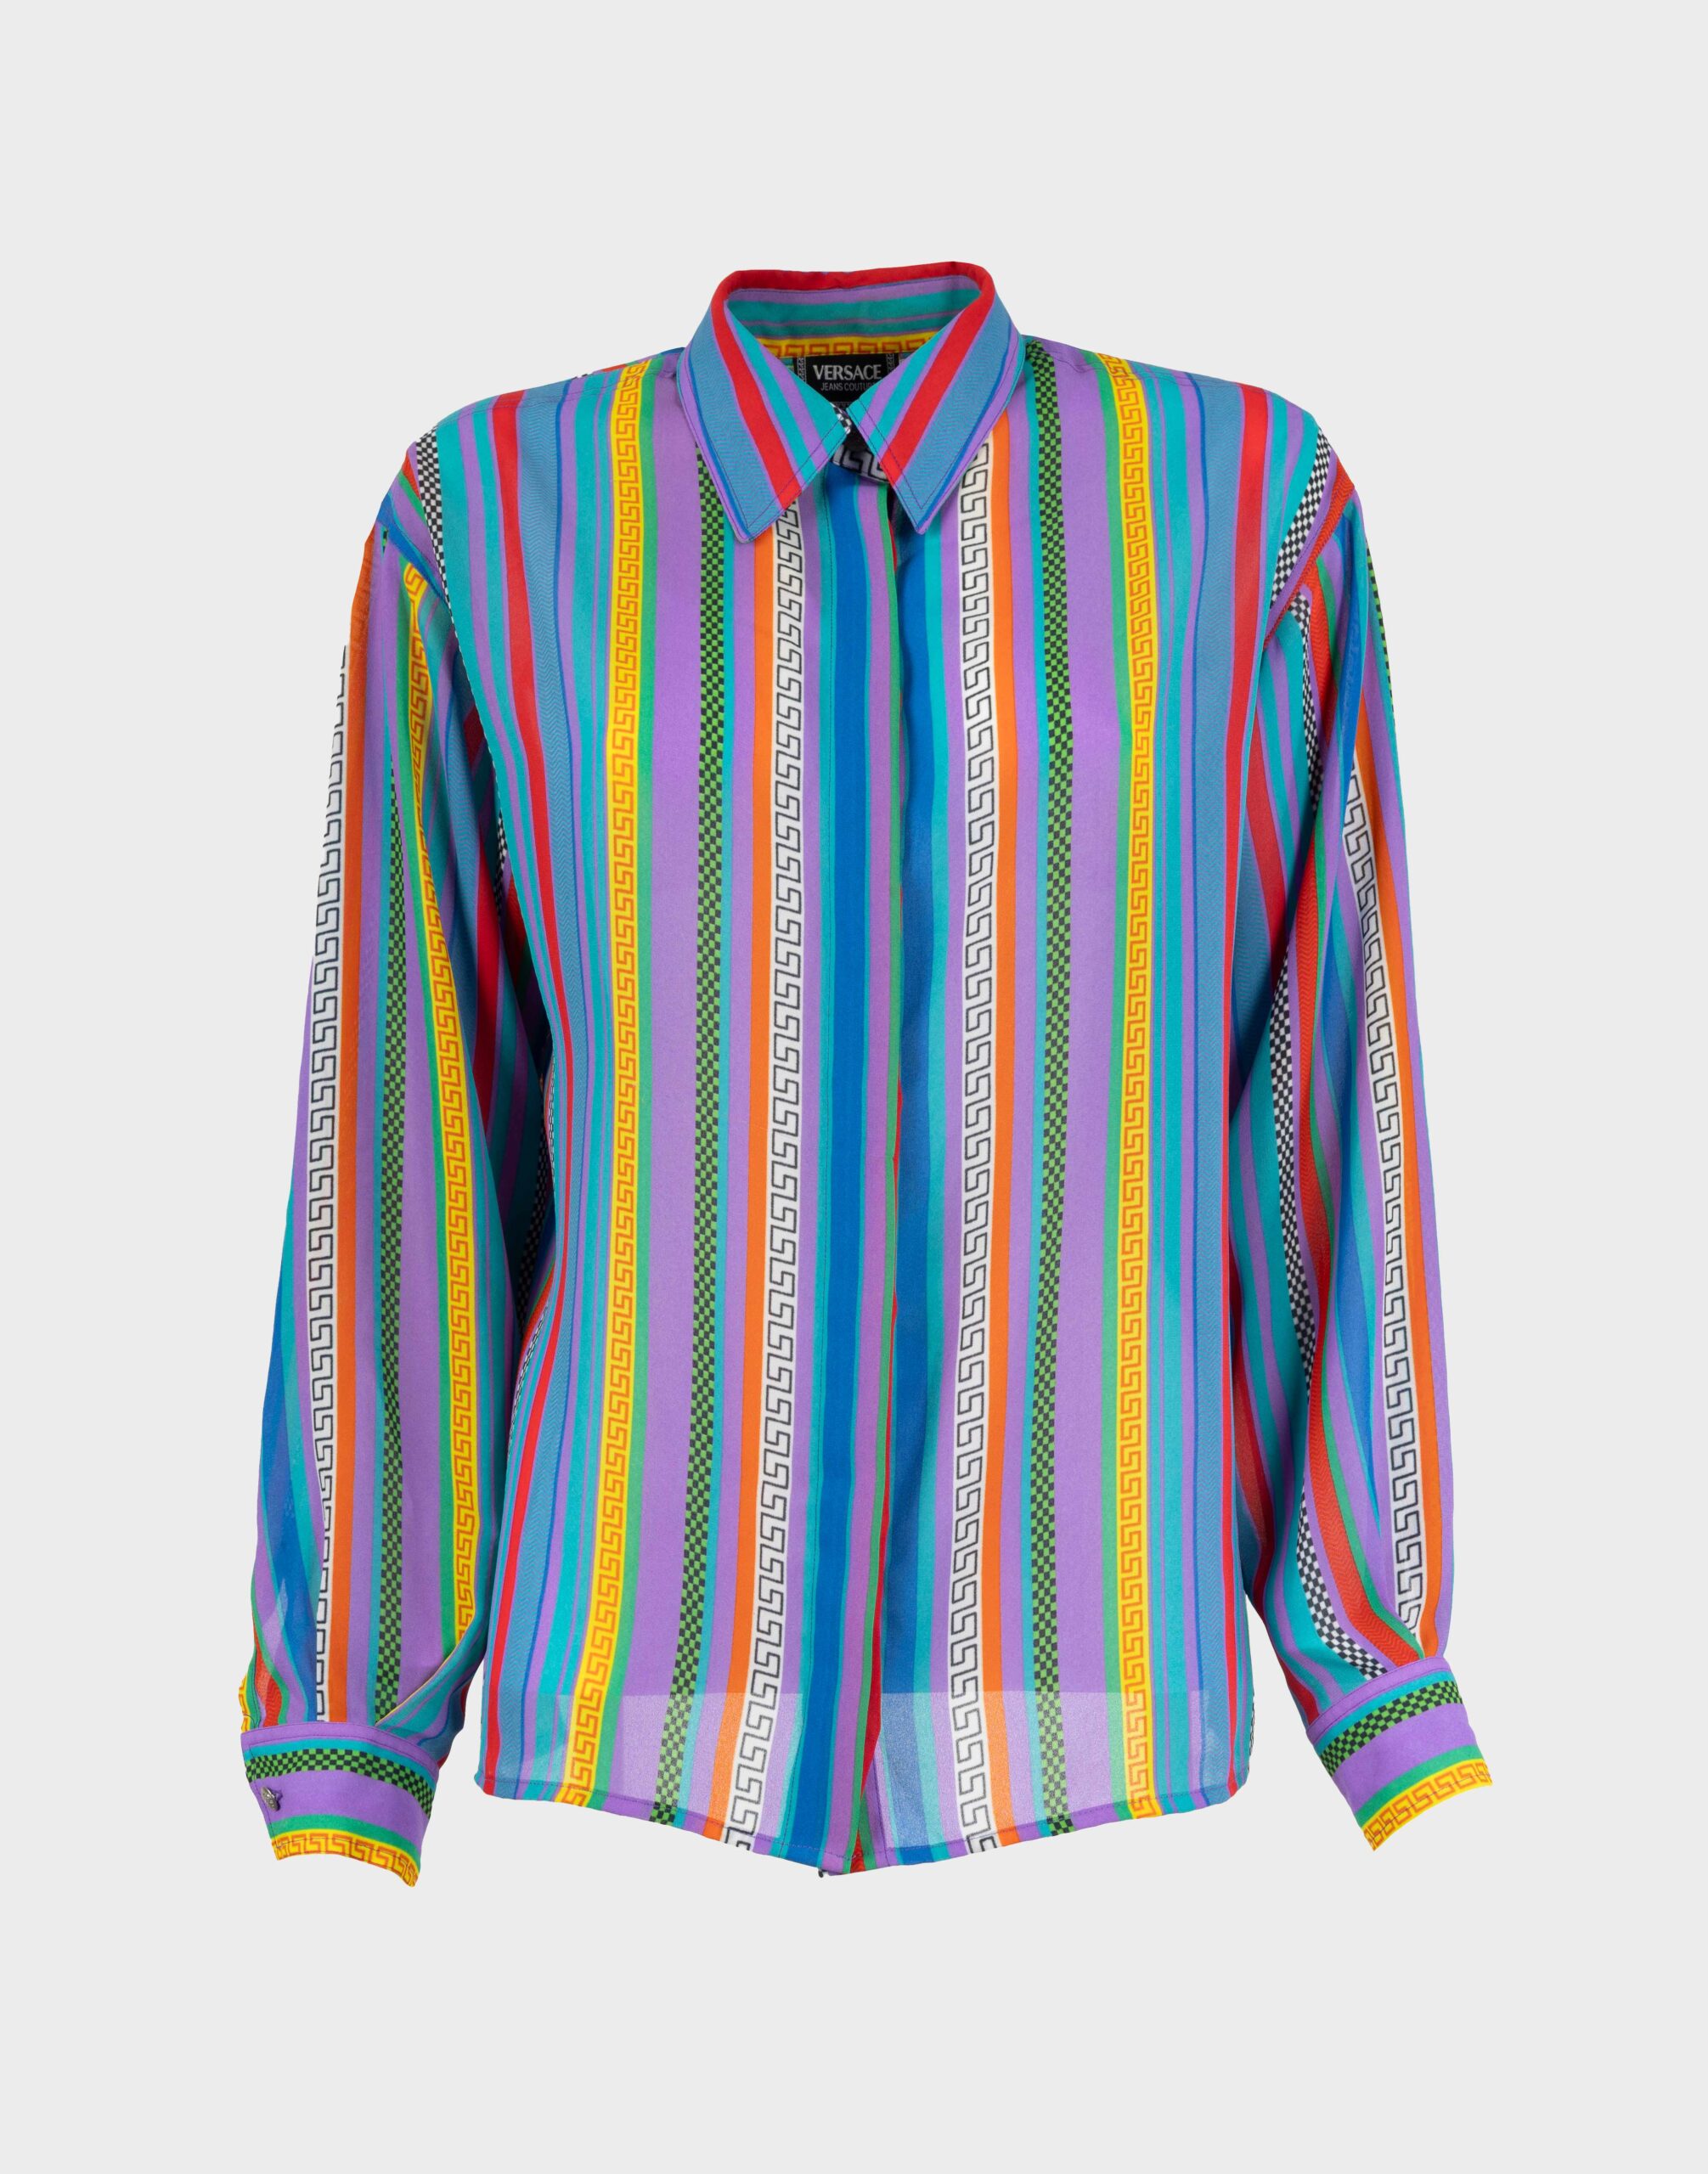 Women's shirt with multicolor stripes in purple, light blue, yellow, and a Greek fret pattern in semi-transparent fabric.